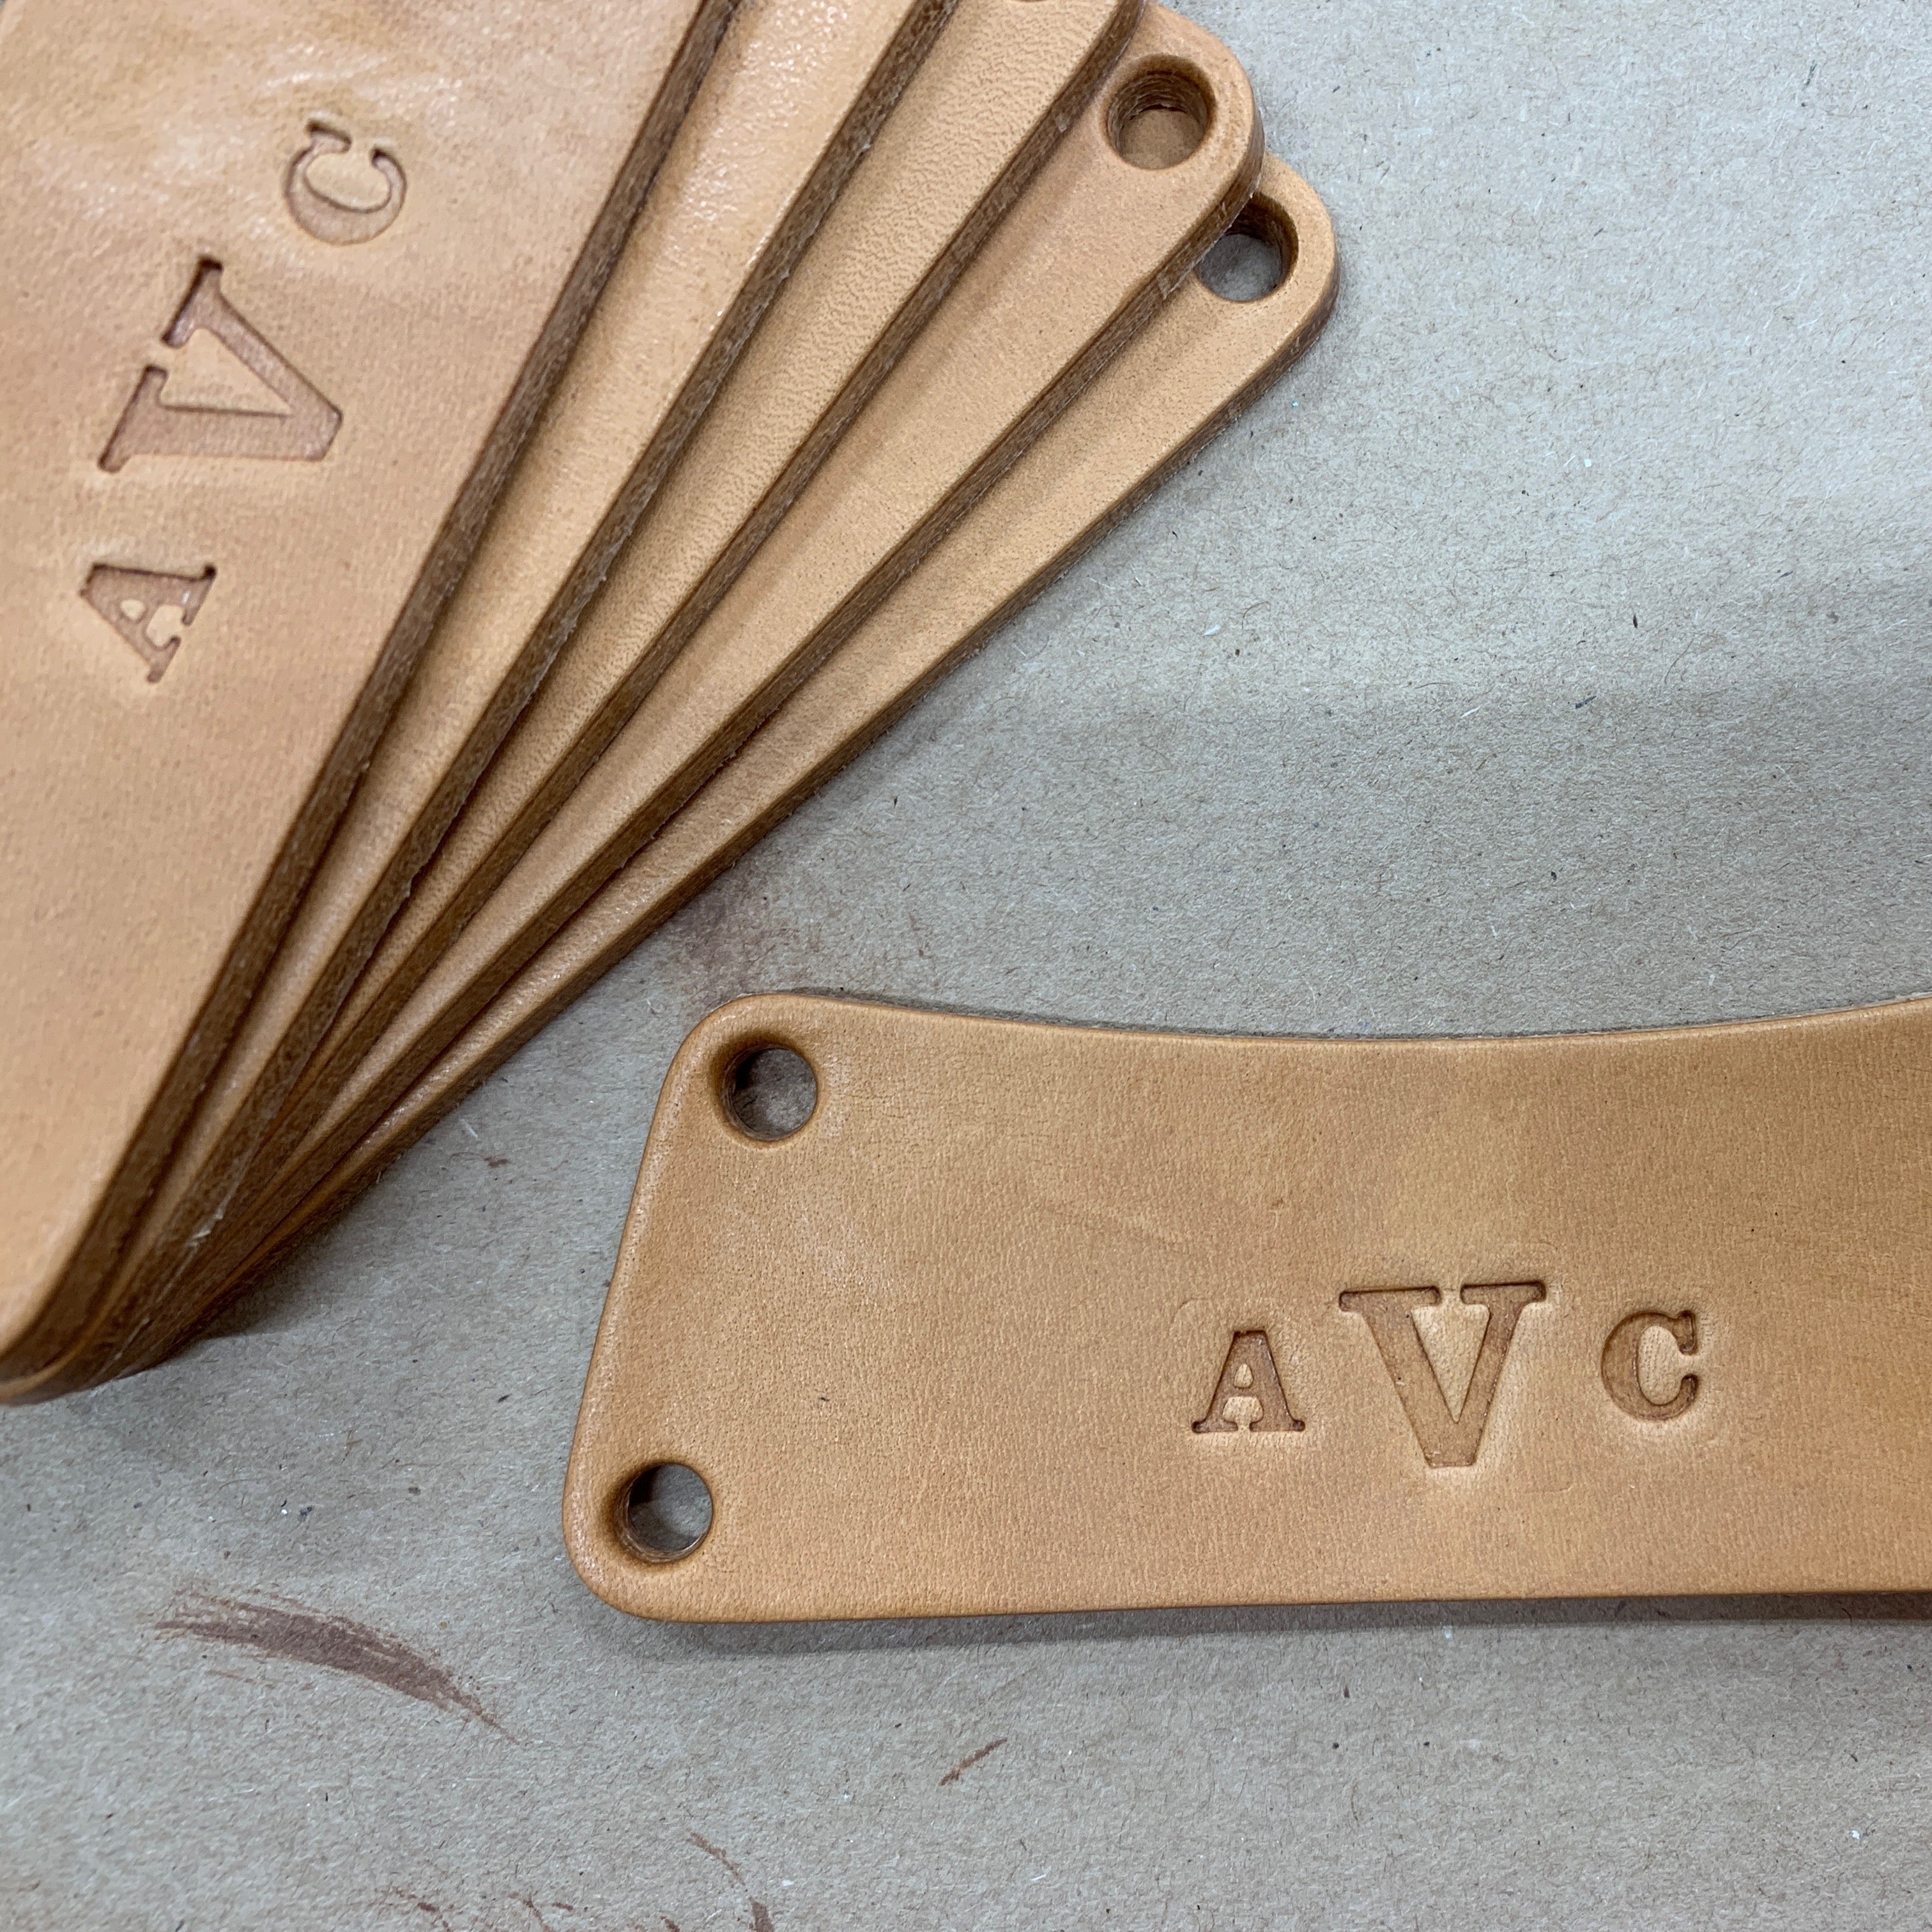 Formal Initials Monogrammed on Leather Handles for Baby's First Nursery Furniture